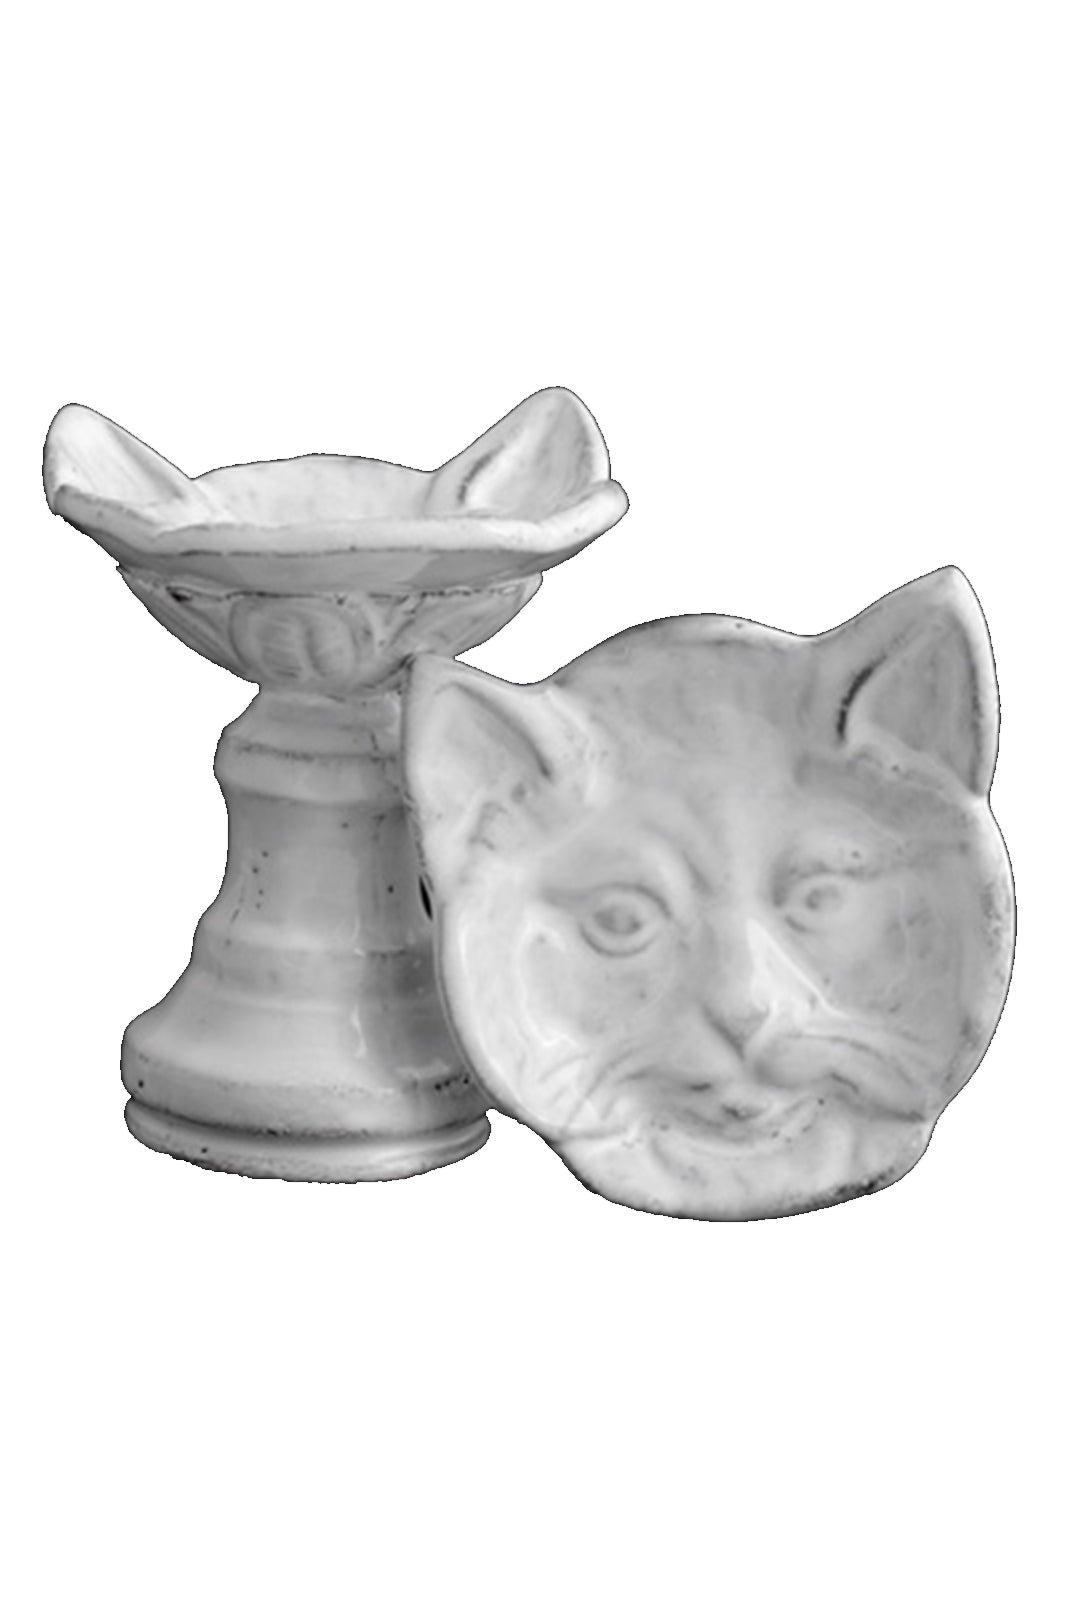 Cat Dish on Stand